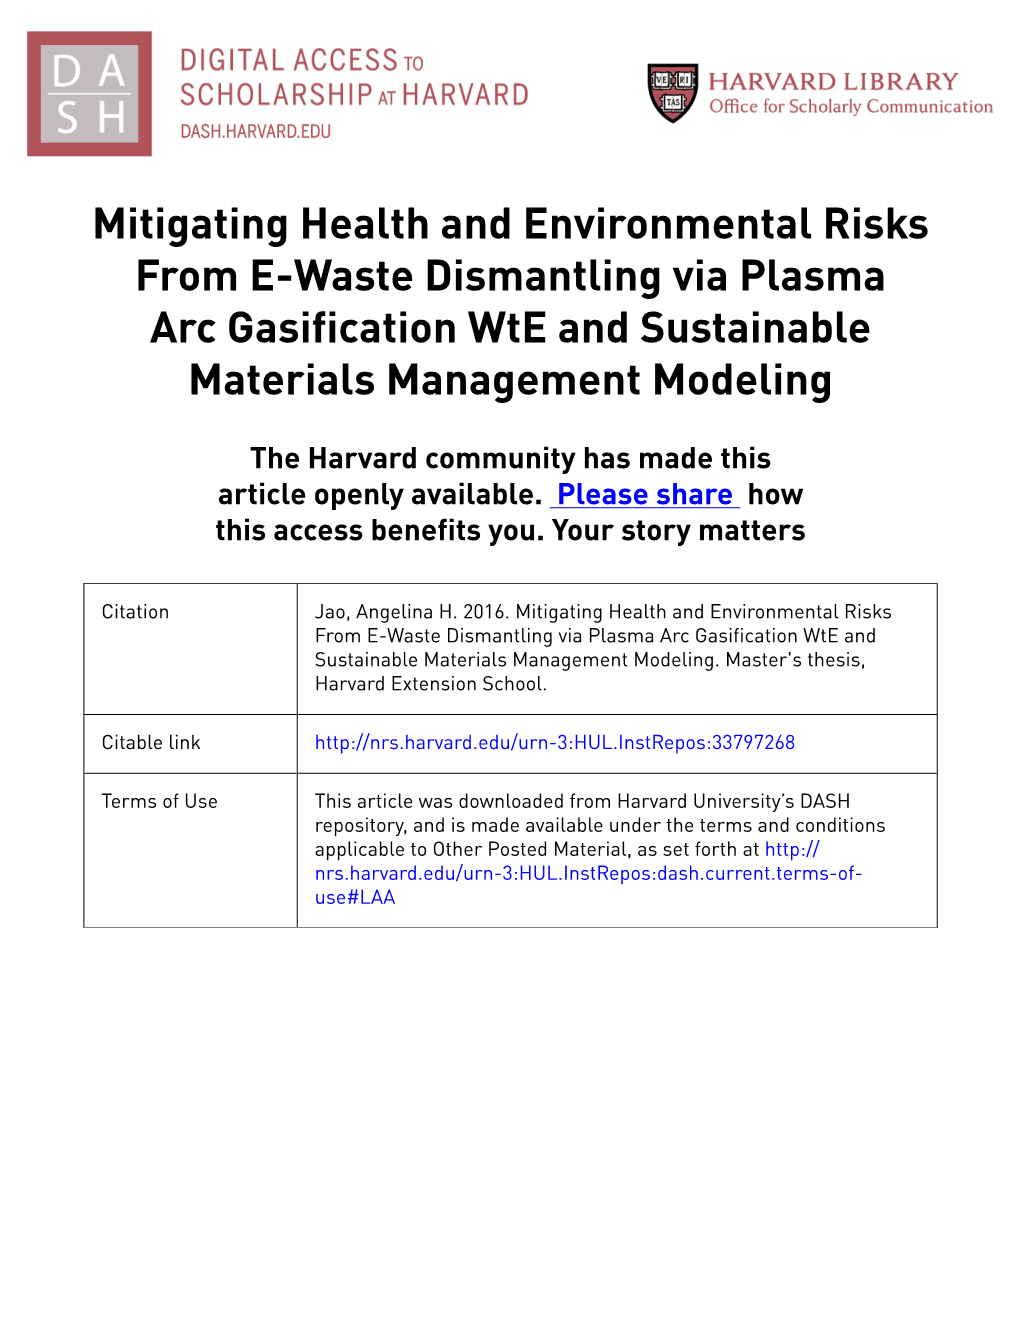 Mitigating Health and Environmental Risks from E-Waste Dismantling Via Plasma Arc Gasification Wte and Sustainable Materials Management Modeling